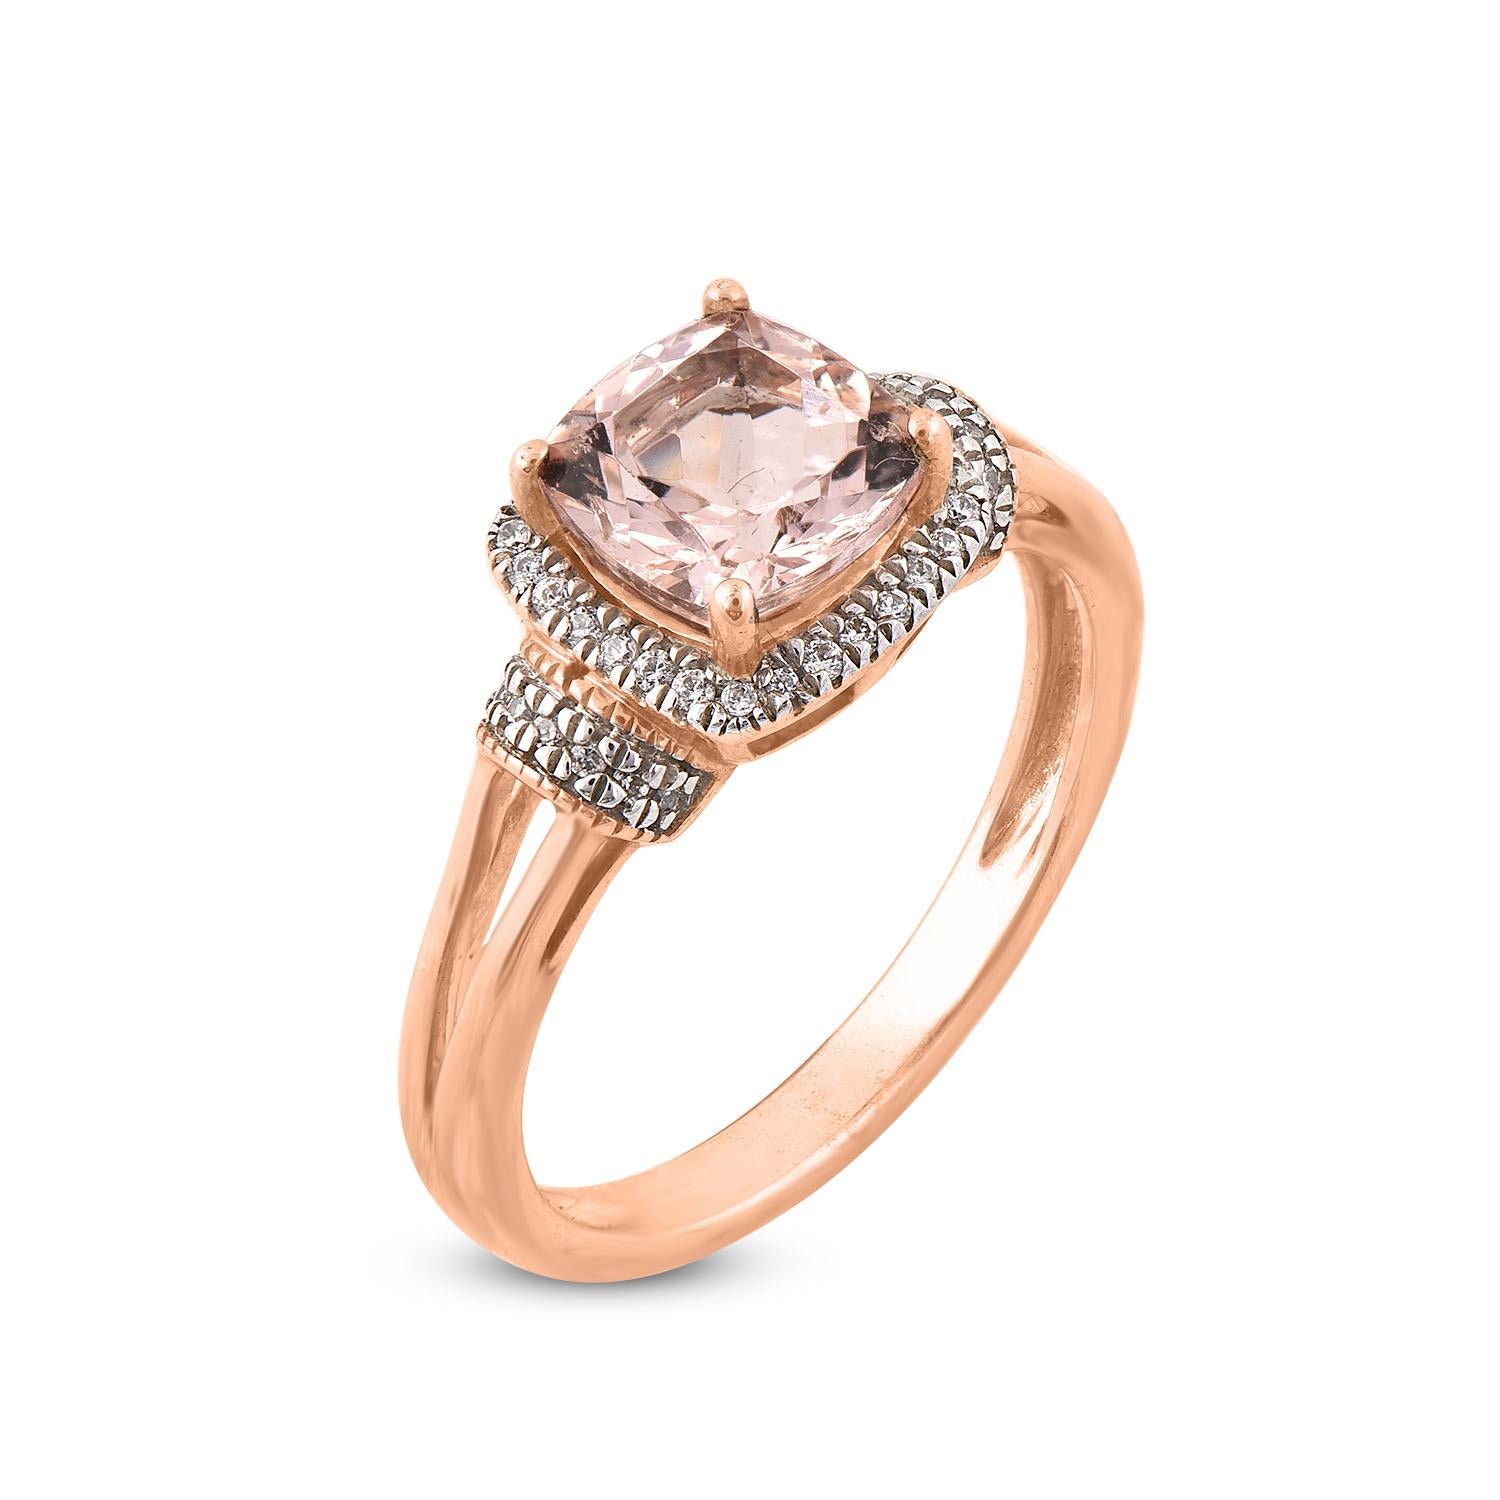 This ring is Crafted beautifully in 14 karat Rose gold and this sparkling design studded with 42 round cut diamonds and 1 cushion cut morganite set in prong and pave setting. Diamonds are graded H-I Color, I2 Clarity.
